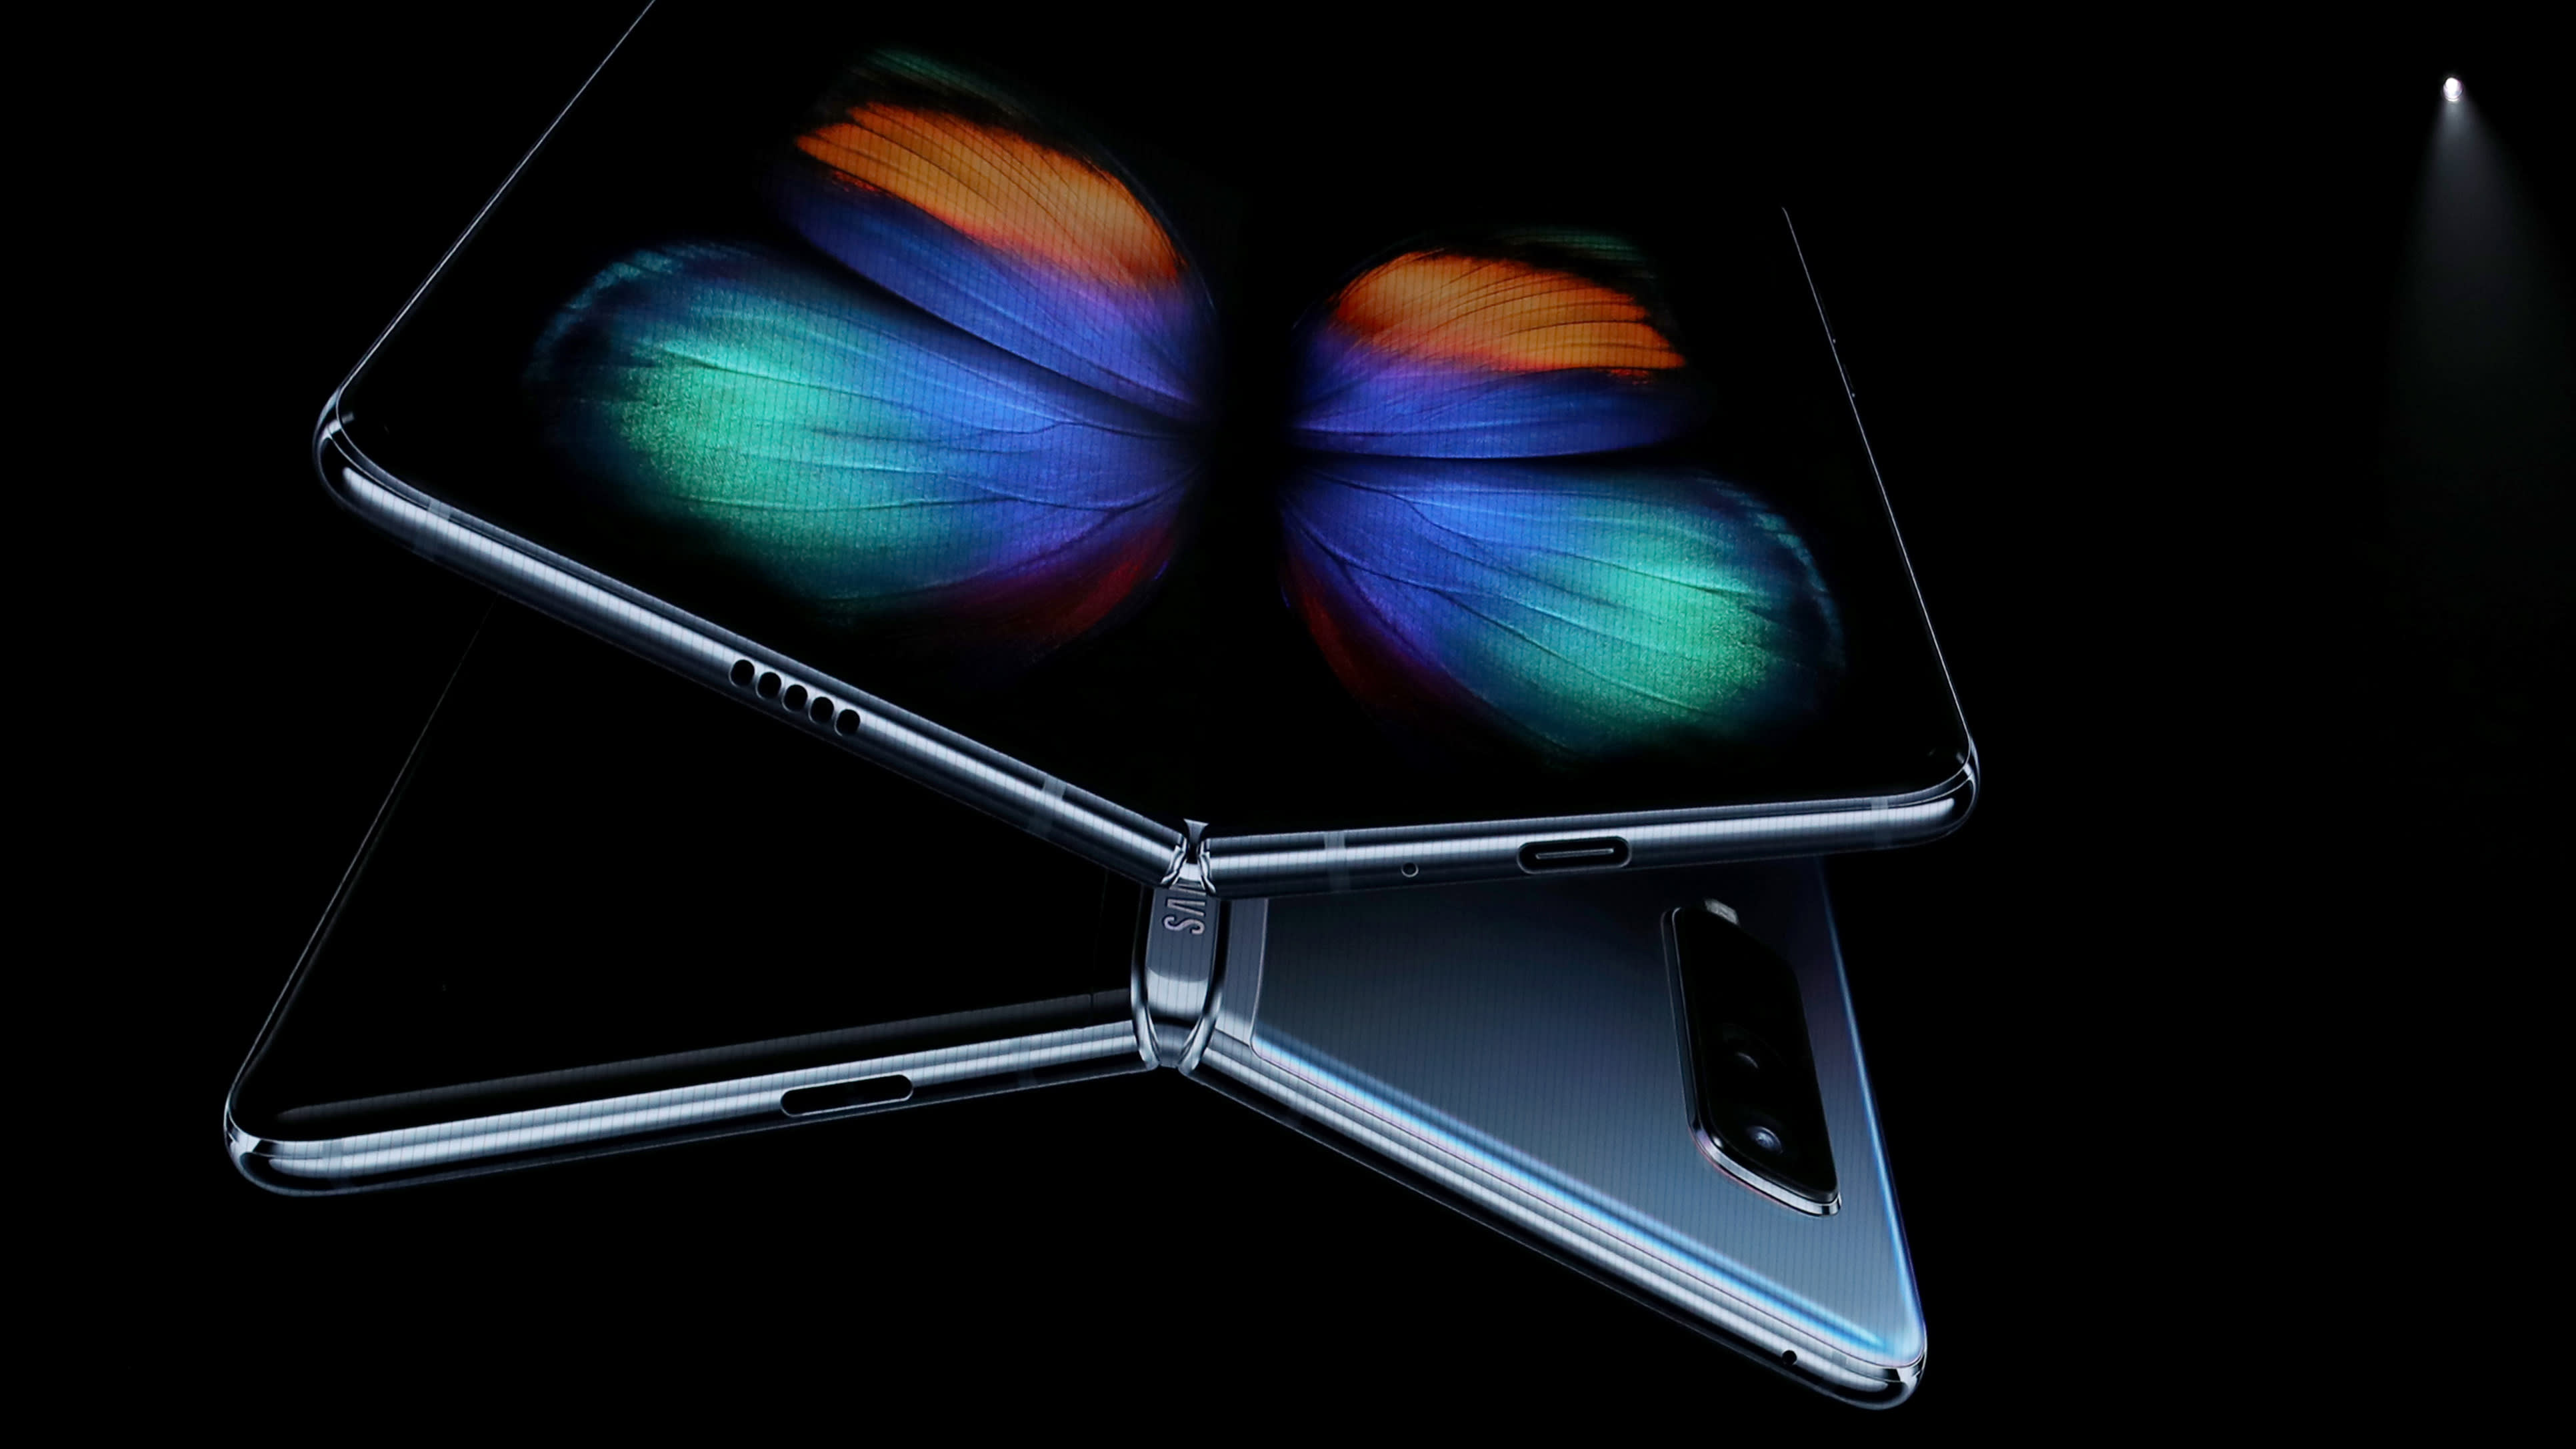 Samsung sells out its Galaxy Fold in few minutes again for the second time in China